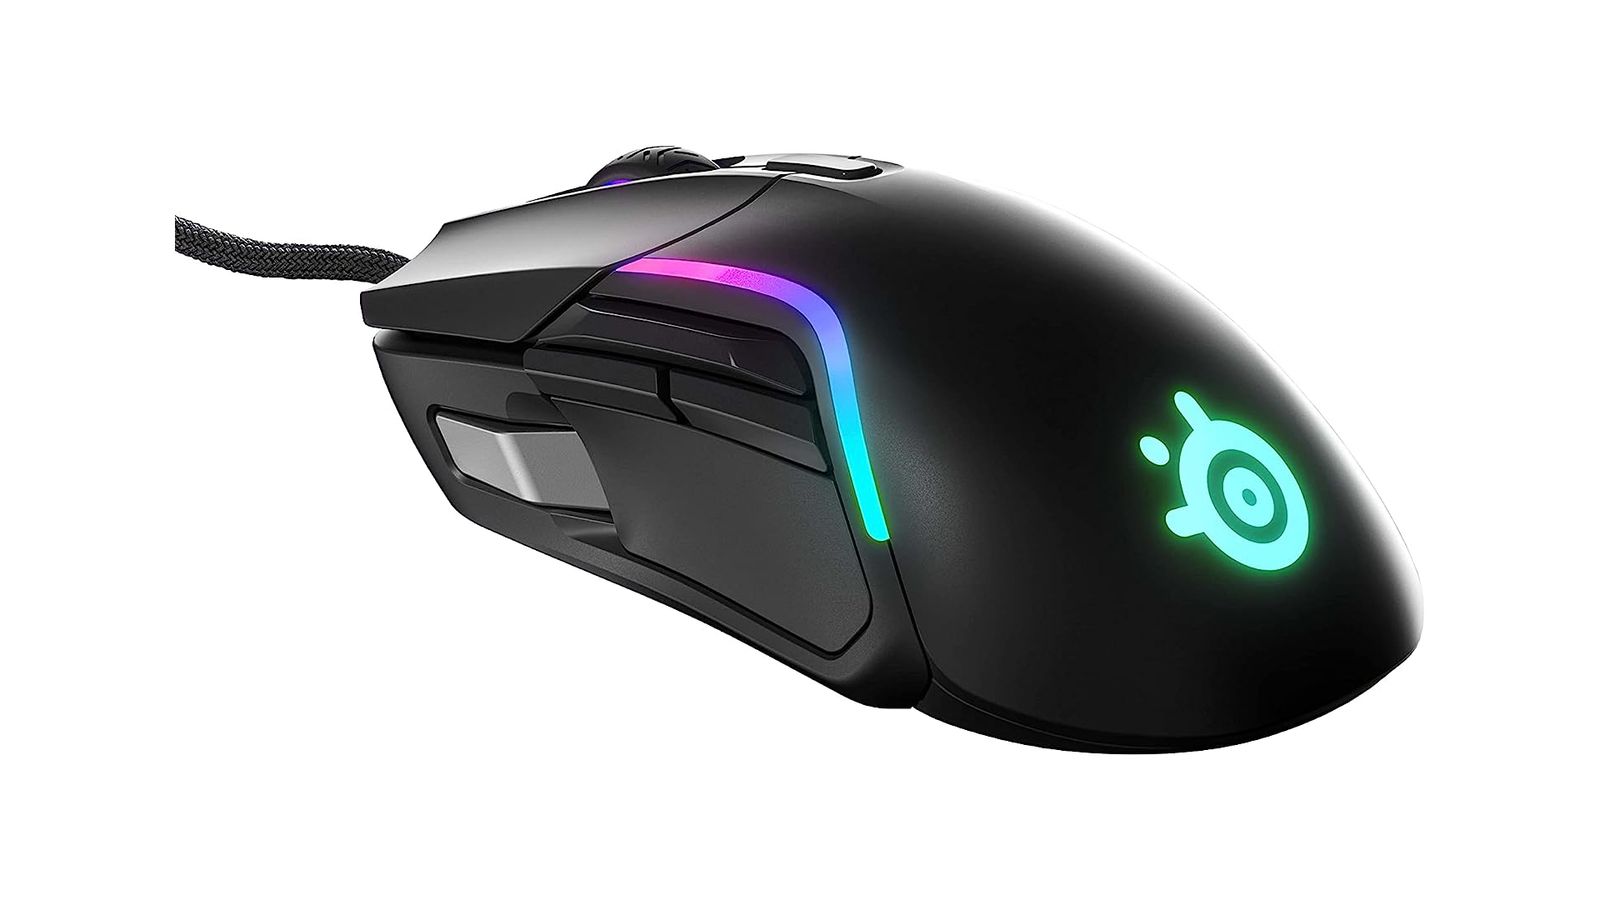 SteelSeries Rival 5 product image of a black wired mouse featuring pink and light blue lighting.